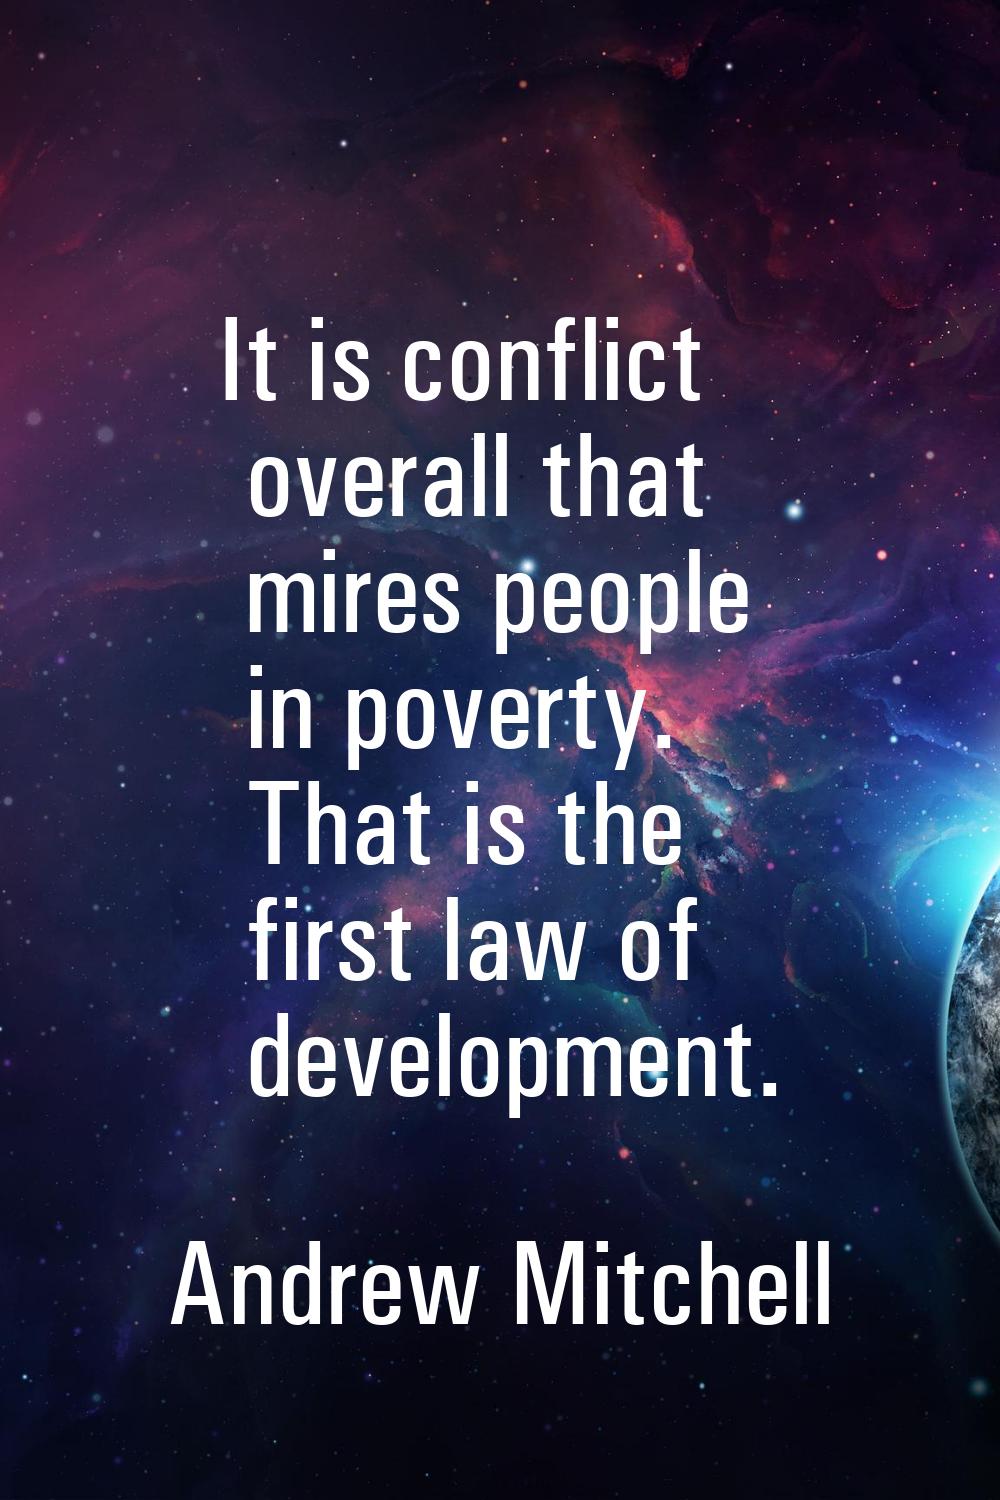 It is conflict overall that mires people in poverty. That is the first law of development.